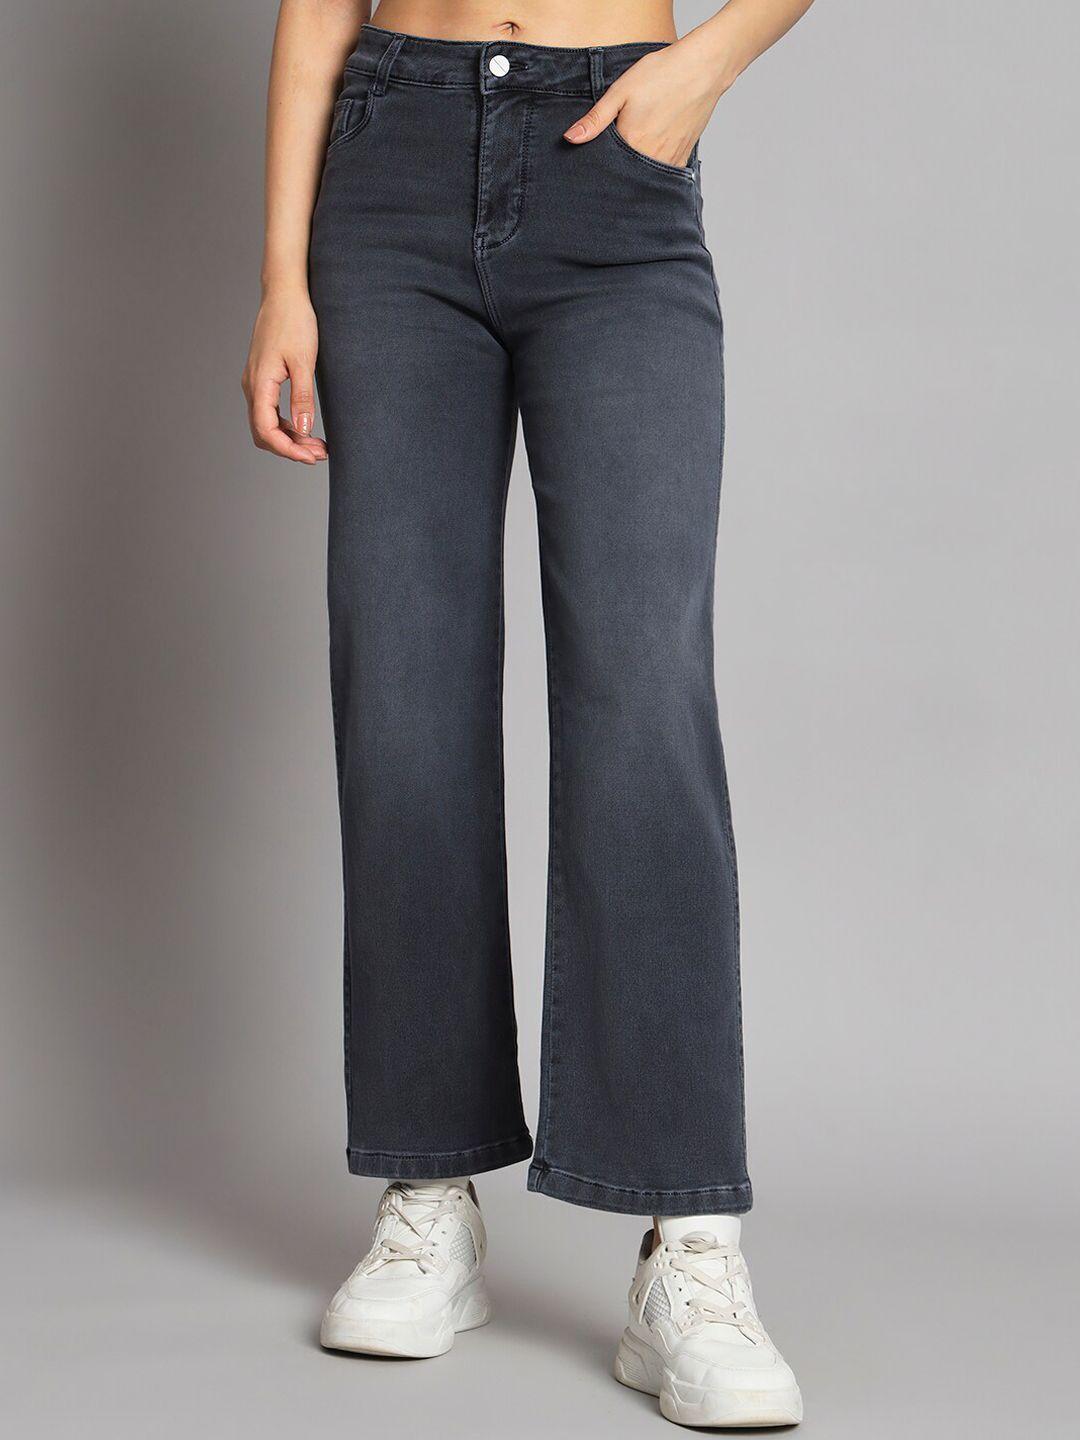 broowl-women-pop-flared-mid-rise-clean-look-light-fade-stretchable-jeans